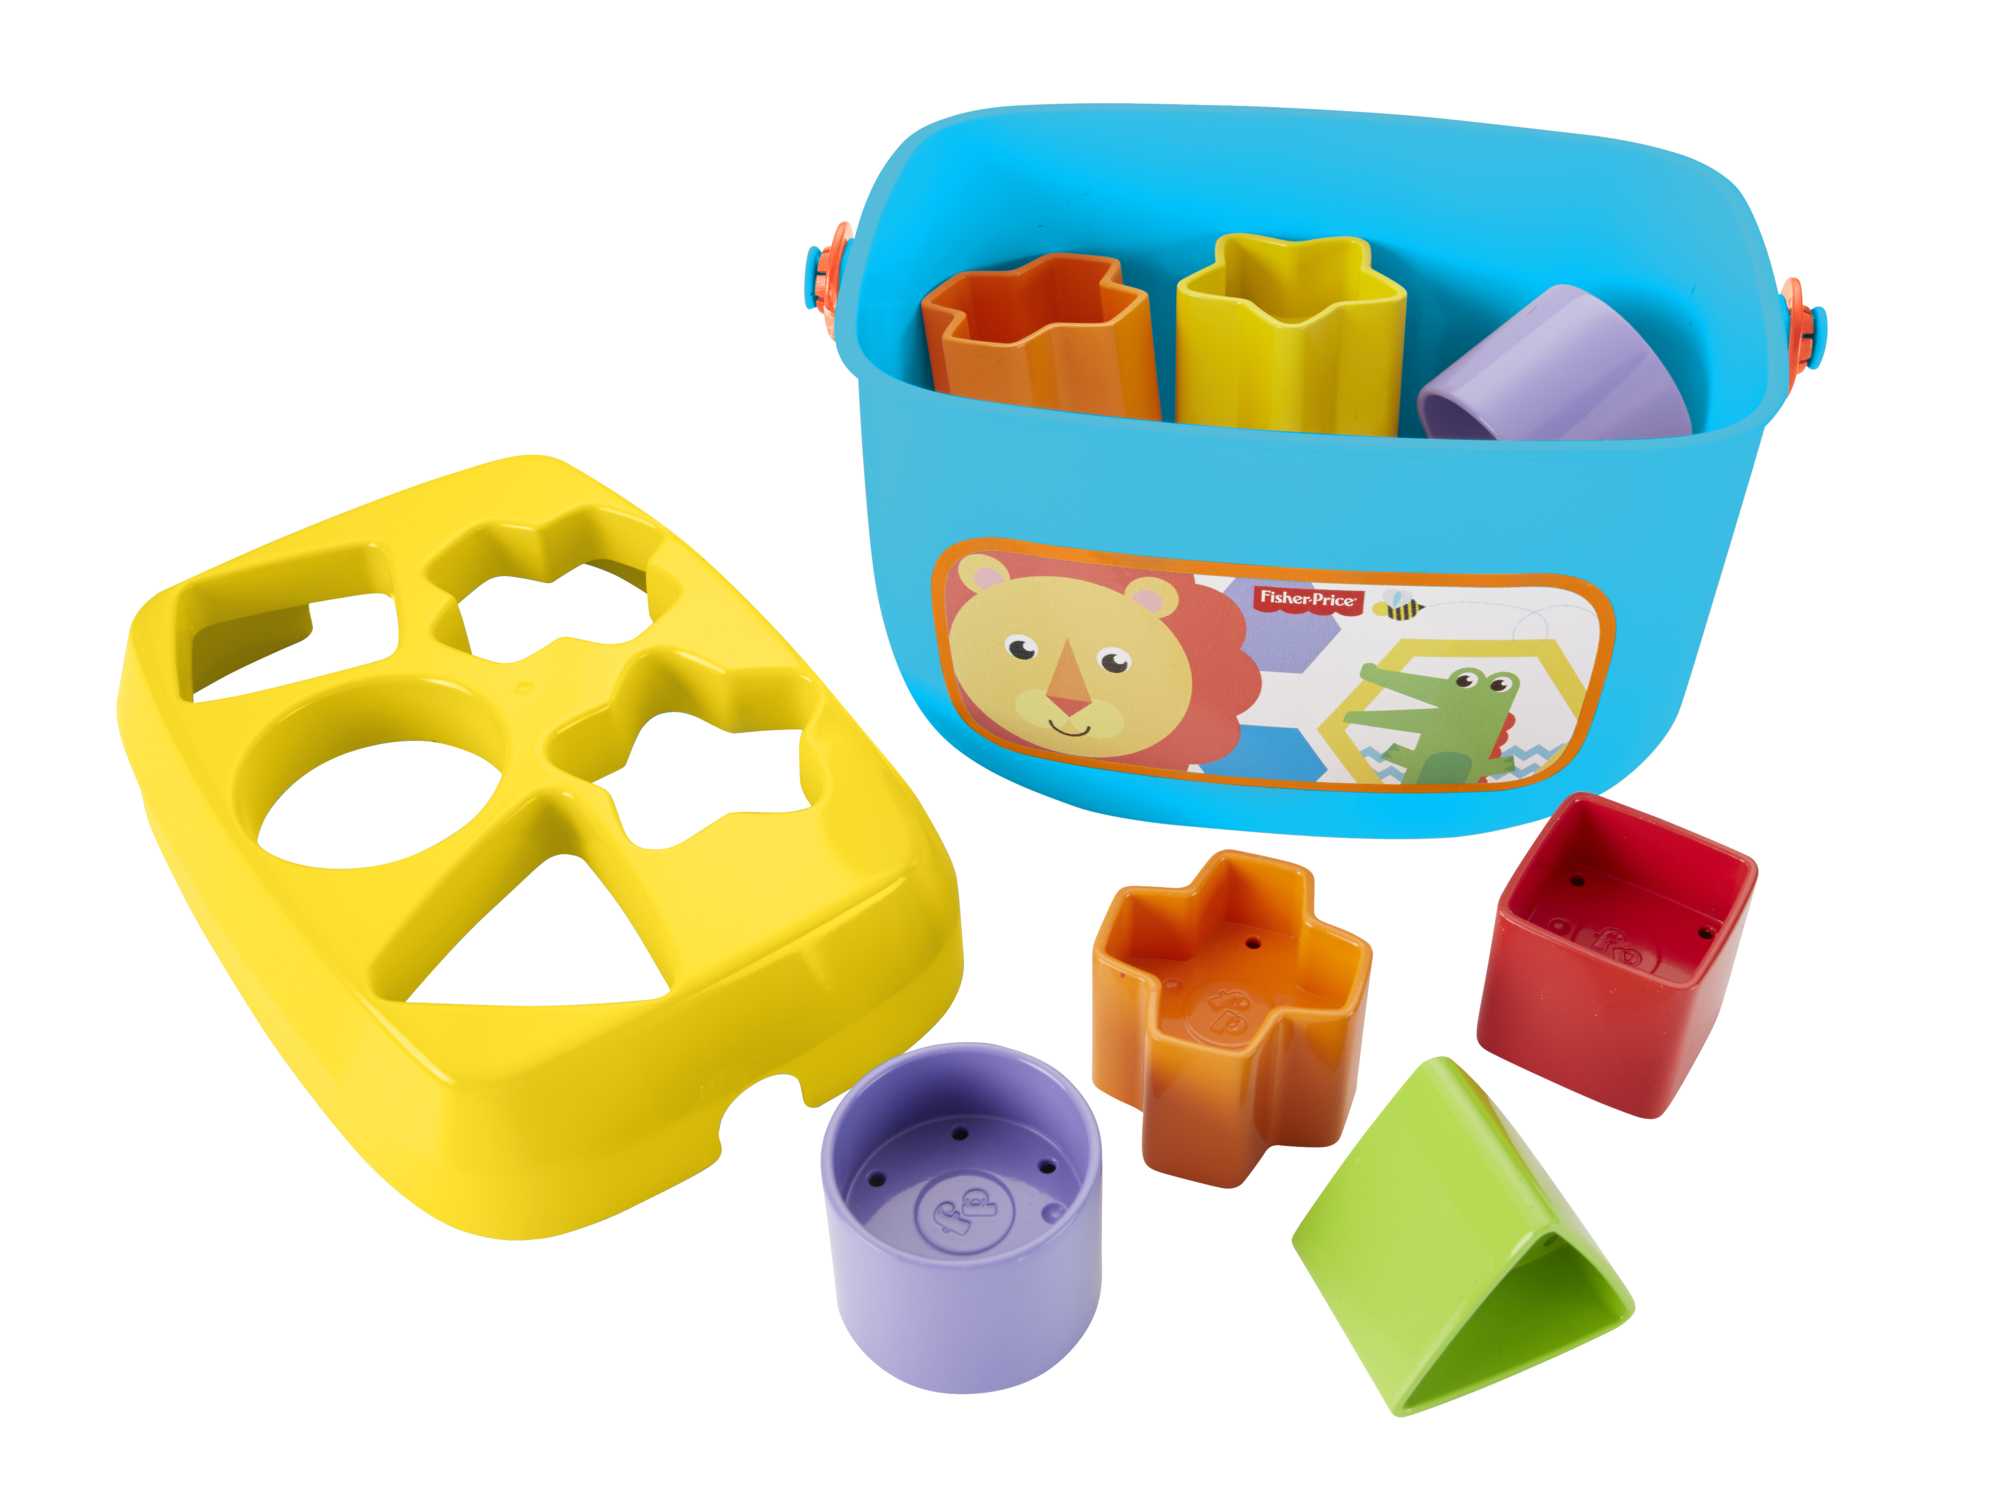 Fisher-Price Baby’s First Blocks Shape Sorting Toy with Storage Bucket, 12 Pieces - image 4 of 7